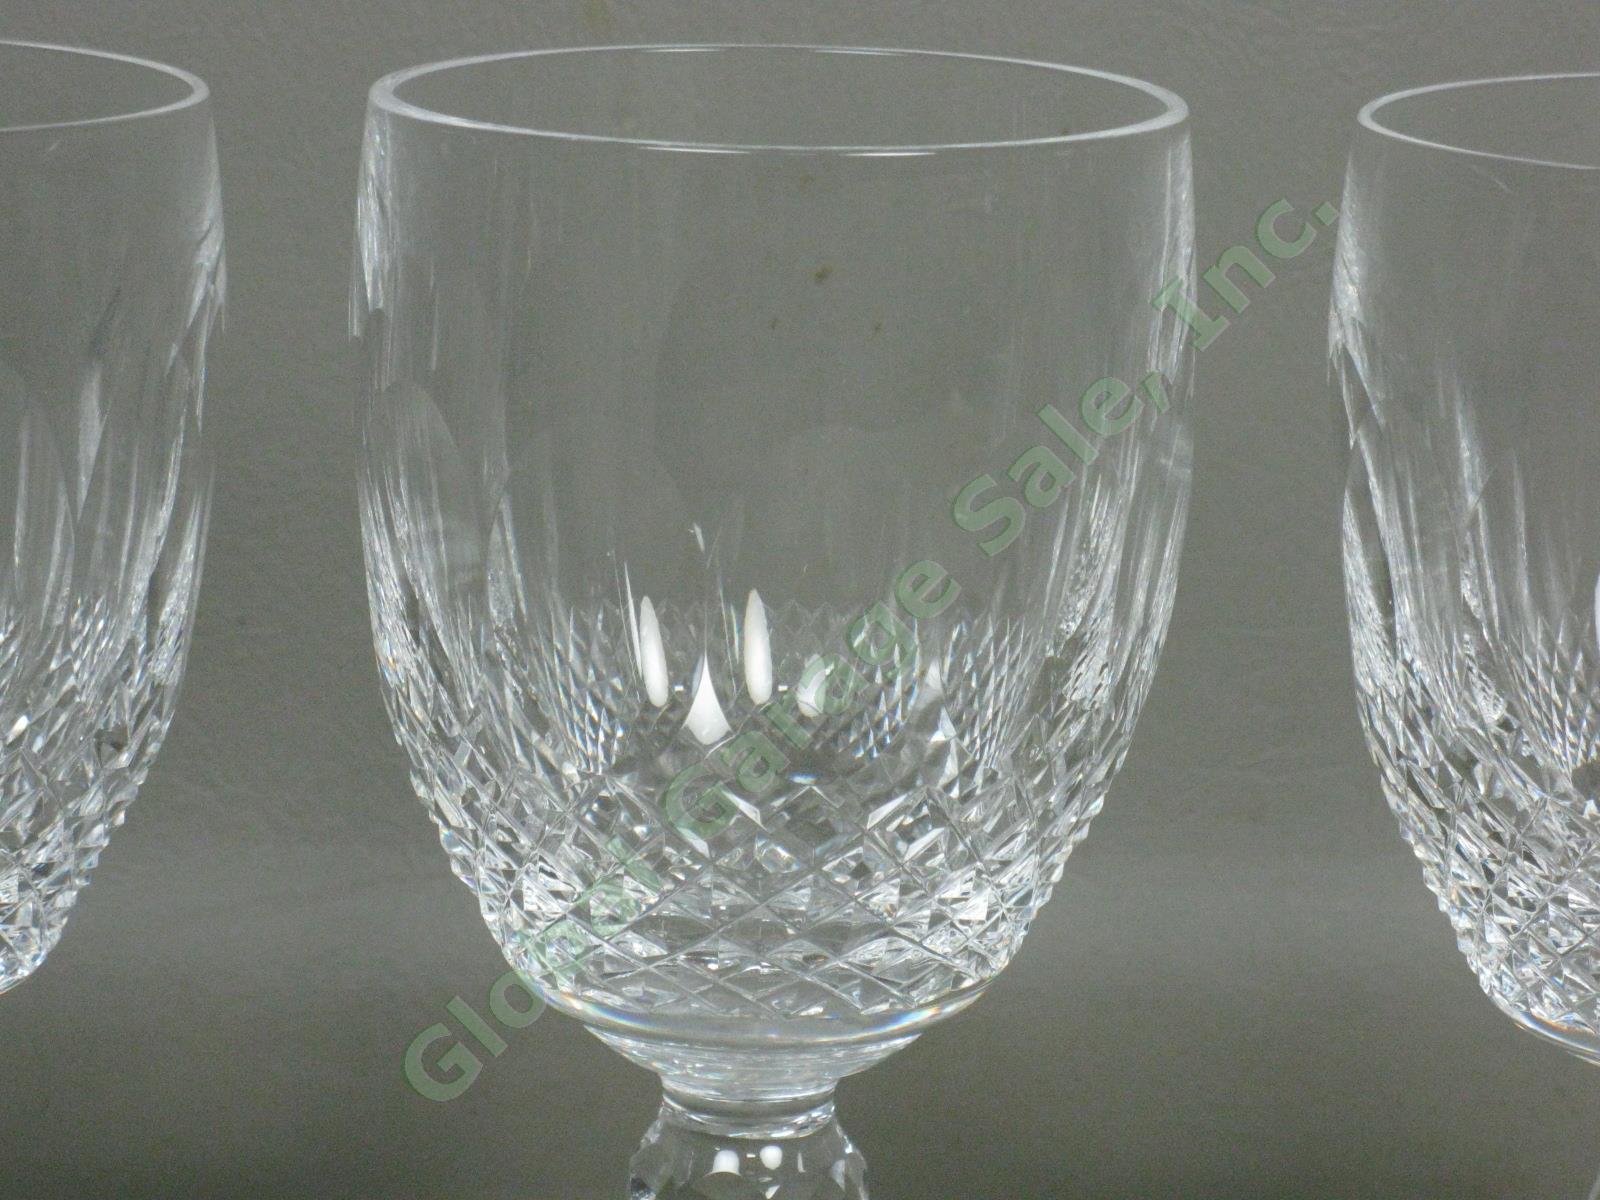 3 Waterford Cut Lead Crystal Colleen Water Goblet Glasses Set Lot 5-1/4" Tall NR 1